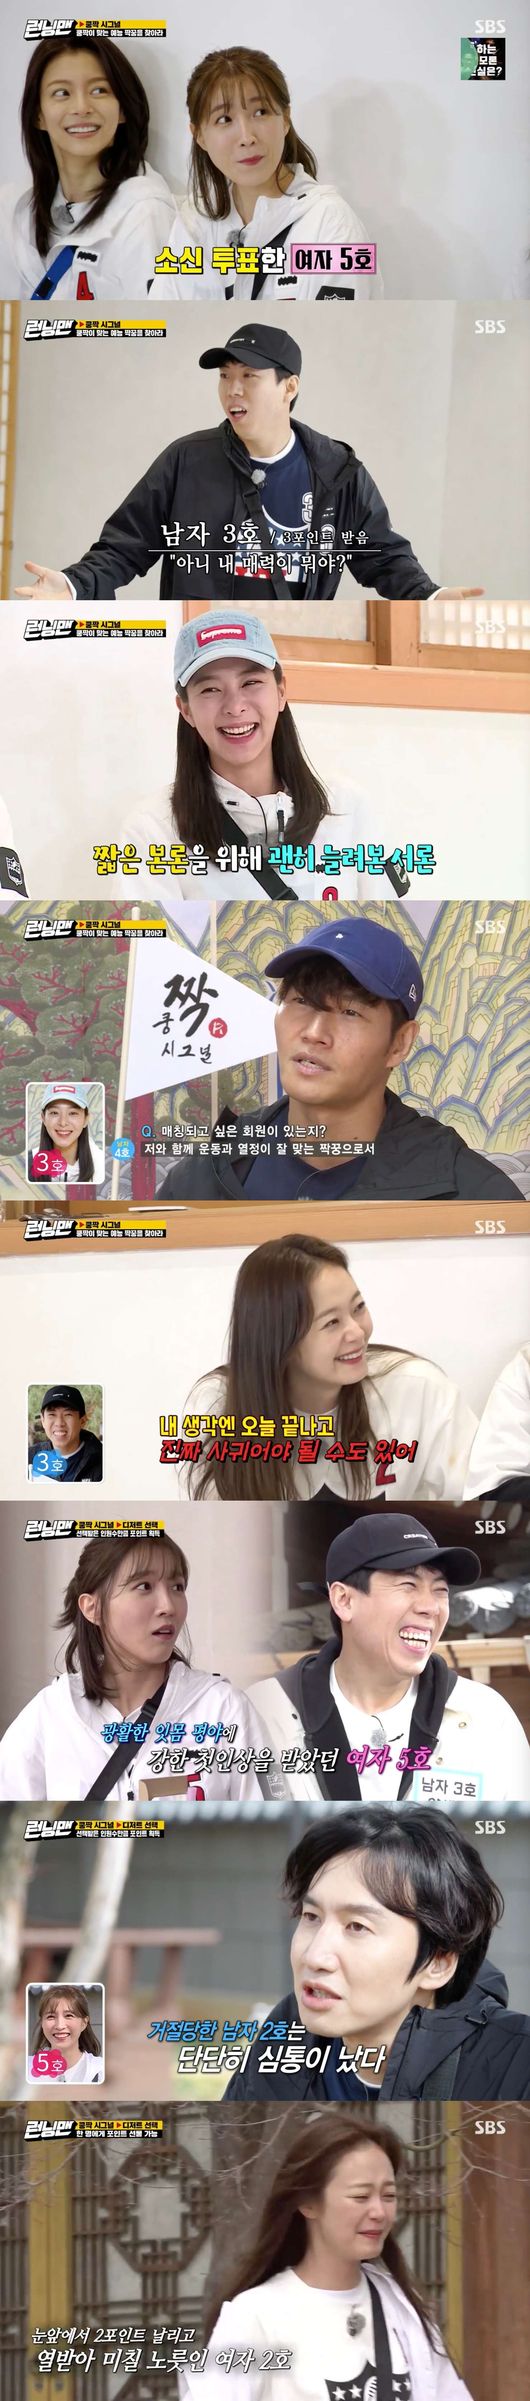 Running Man returned to 1991 and began to travel memories.On SBS Running Man broadcasted on the afternoon of the 25th, the members of the Seol In-ah, Lee Cho-hee, and Jin He-In were drawn.On the day, Running Man kung-kak Signal results showed three Yang Se-chan votes, two for Yoo Jae-Suk, one for Kim Jong-kook, and zero for Lee Kwang-soo and Haha and Ji Suk-jin.Yang Se-chan said, Whats my charm? My heart is beating suddenly. What should I do? Im so excited.I am so upset, said Jeon So-min, who envied I think he is attractive. Ji Suk-jin said, I feel so sick. I feel human betrayal.The long-awaited Running Man last order was the dessert Choices corner; as with lunchtime, the point-acquisition rule was the same.Kim Jong-kook predicted a couple with Seol In-ah, saying, I think Seol In-ah will fit well with me as a partner with exercise and passion. Yoo Jae-suk said, The goal is one for me.I will only take Ji Hyo, said Song Ji-hyo.Running Man Lee Cho-hee explained why he gave Yang Se-chan two votes, saying, It was a strong member at the first impression, so its just that.Then Jeon So-min said: I think we might have to really date after today.I do not like the possibility, I do not want it very much, said Lee Cho-hee, who shook his head.Yang Se-chan said, I dont know why Lee Cho-hee did it. He picked me for the first impression. Why did you pick me?I am so excited, he said with a confident expression.In particular, Yang Se-chan said of Lee Kwang-soo, who received 0 votes, It is a trap to emit too much charm without self-attraction.I have to know and come at it, Lee Kwang-soo said, Savoe was condescending and sick. Savoie was shit and sick.Imagine you are lying at home drunk at home after drinking beer at home later in the evening. Ahead of the final Choices, Lee Cho-hee said, Single-mindedly style, dandelion, first impression was good.Yang Se-chan also said, Its a great satisfaction.I will now show you the Single-mindedly dandelion behavior because Lee Cho-hee has been Choicesing me. Lee Kwang-soo, on the other hand, said: Lee Cho-hee was really the worst; I ate together for a while and then I felt it, my face full of greed and heartache.You dont have to do Choices me, Yang Se-chan keeps doing the intrusive things, he said, angry.Running Man final result: Jeon So-min gives Ji Suk-jin, Song Ji-hyo gives Haha, Haha gives Song Ji-hyo, Ji Suk-jin gives Seol In-ah, Seol In-ah gives Kim Jong-kook, Kim Jong-kook gives Seol In-ah, Lee Kw Jang-soo took the Jeong He-In, Jeong He-In took the Yang Se-chan, Lee Cho-hee took the Yang Se-chan, and Yang Se-chan took the Lee Cho-hee.Yoo Jae-Suk gave up voting, saying, I can not see someone else changing my life.Song Ji-hyo, Yang Se-chan and Seol In-ah won gold, while Lee Kwang-soo, Ji Suk-jin, Jeon So-min and Jin He-In were penalized.Running Man Yoo Jae-Suk, Ji Suk-jin, Kim Jong-kook, Jeon So-min, Song Ji-hyo, Lee Kwang-soo, Haha and Yang Se-chan conducted 91 class is BACK Race.Running Man members transformed to 91st grade, and joined the retro craze by summoning old memories perfectly.Not only fashion, but also the view of the times, back in 1991, and reenacted the time perfectly.Running Man members recalled each others memories, and boasted their fashion fashion and made viewers laugh.Unlike other members, Michael Jackson drives a smile on Haha.Today we are going to introduce the culture of the 90s, and as we have returned to 30 years ago, we have prepared 20 items that remember the 90s as gifts.We have to acquire 20 gifts. The members of Running Man fell into a memorable trip listening to the song of the 91s and CM songs that the production team presented.In the first round of Running Man 91st Izback, Haha and Lee Kwang-soo succeeded in the mission, Haha was Lee Munse 7th LP and Lee Kwang-soo was Choices.In a moving car, Yoo Jae-Suk asked Ji Suk-jins question, If you go back to 1991, will you go? No, I dont want to lose all my memories.I do not want to live with that idea again. Yoo Jae-Suk also said, It was not too fun,  Kim Jong-kook said.Im going to take my mind now, he said.On the other hand, SBS Running Man is an entertainment program where many stars and members carry out missions together and concentrate on laughing. It is broadcast every Sunday at 5 pm.SBS Running Man